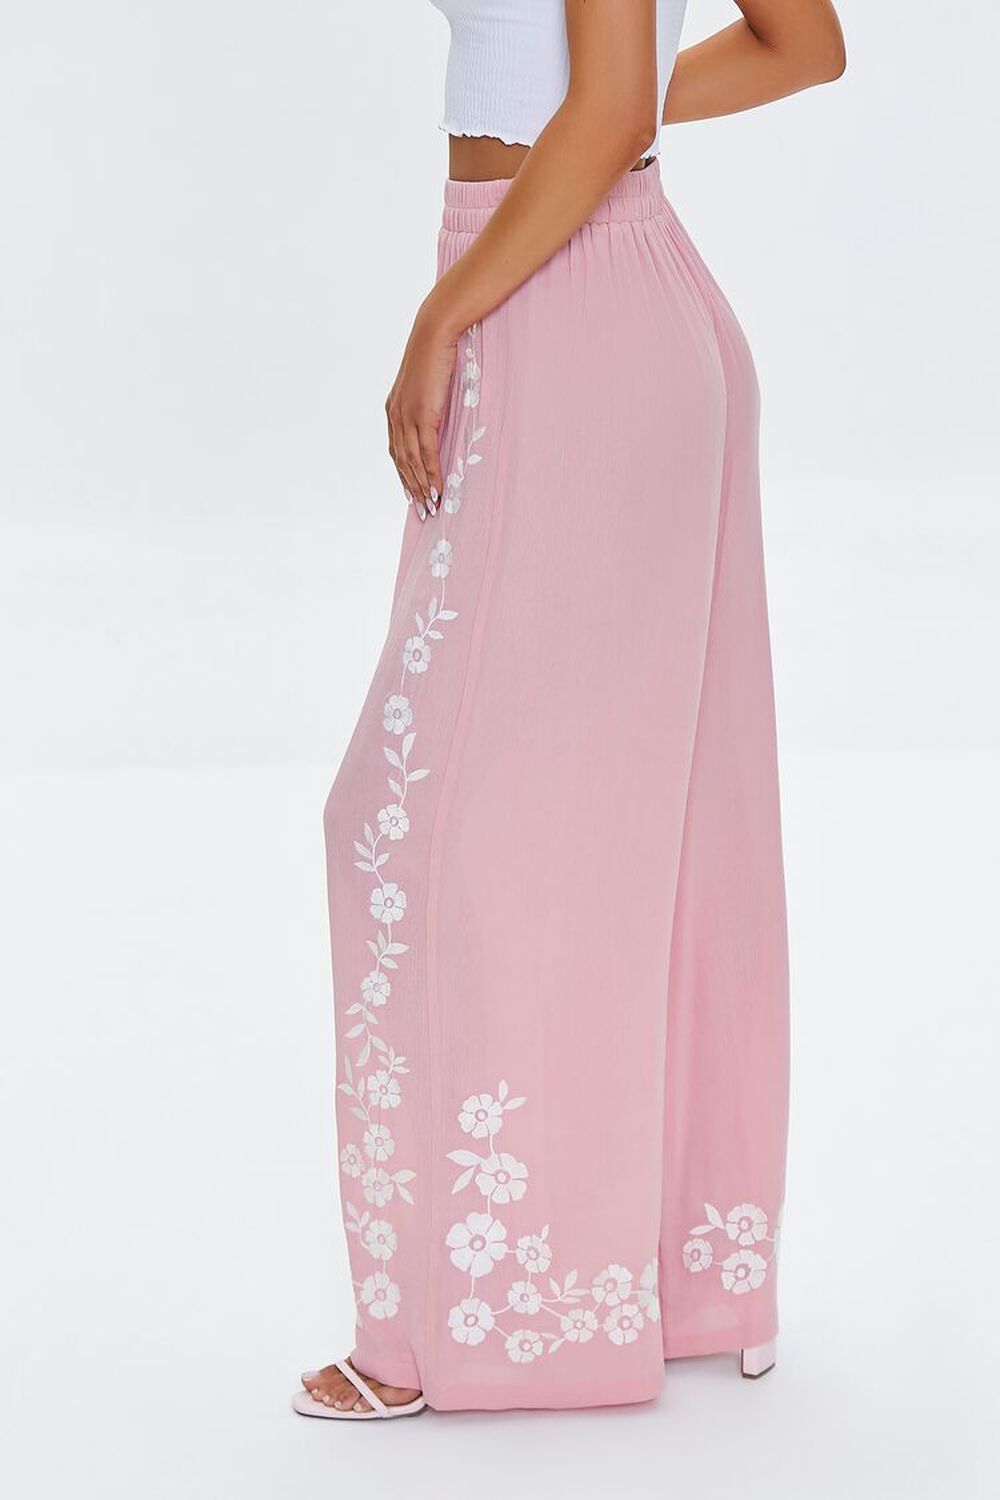 ROSE/CREAM Floral Embroidered Palazzo Pants, image 3